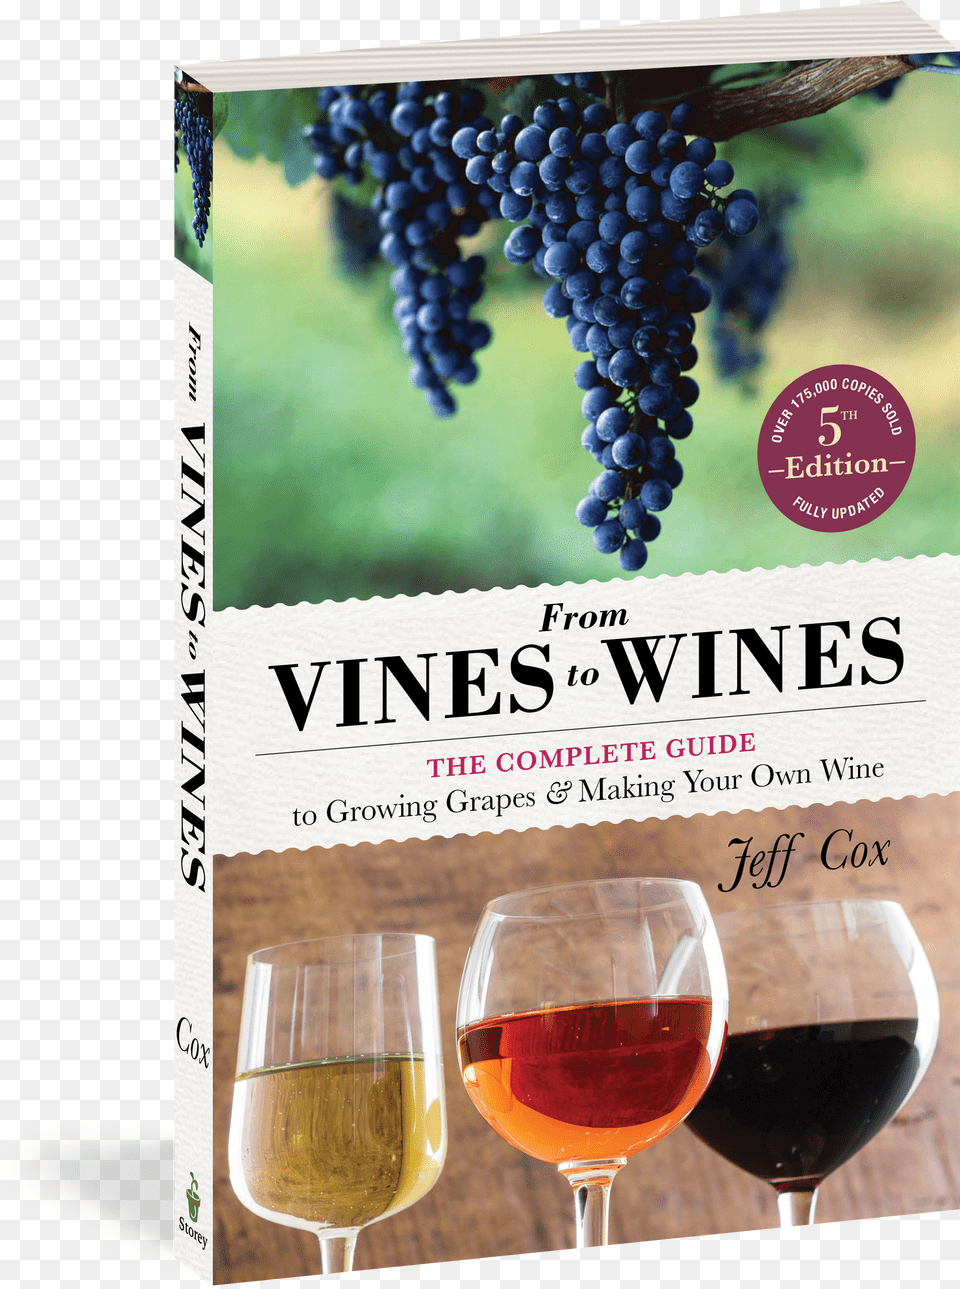 From Vines To Wines 5th Edition Vines To Wines By Jeff Cox Png